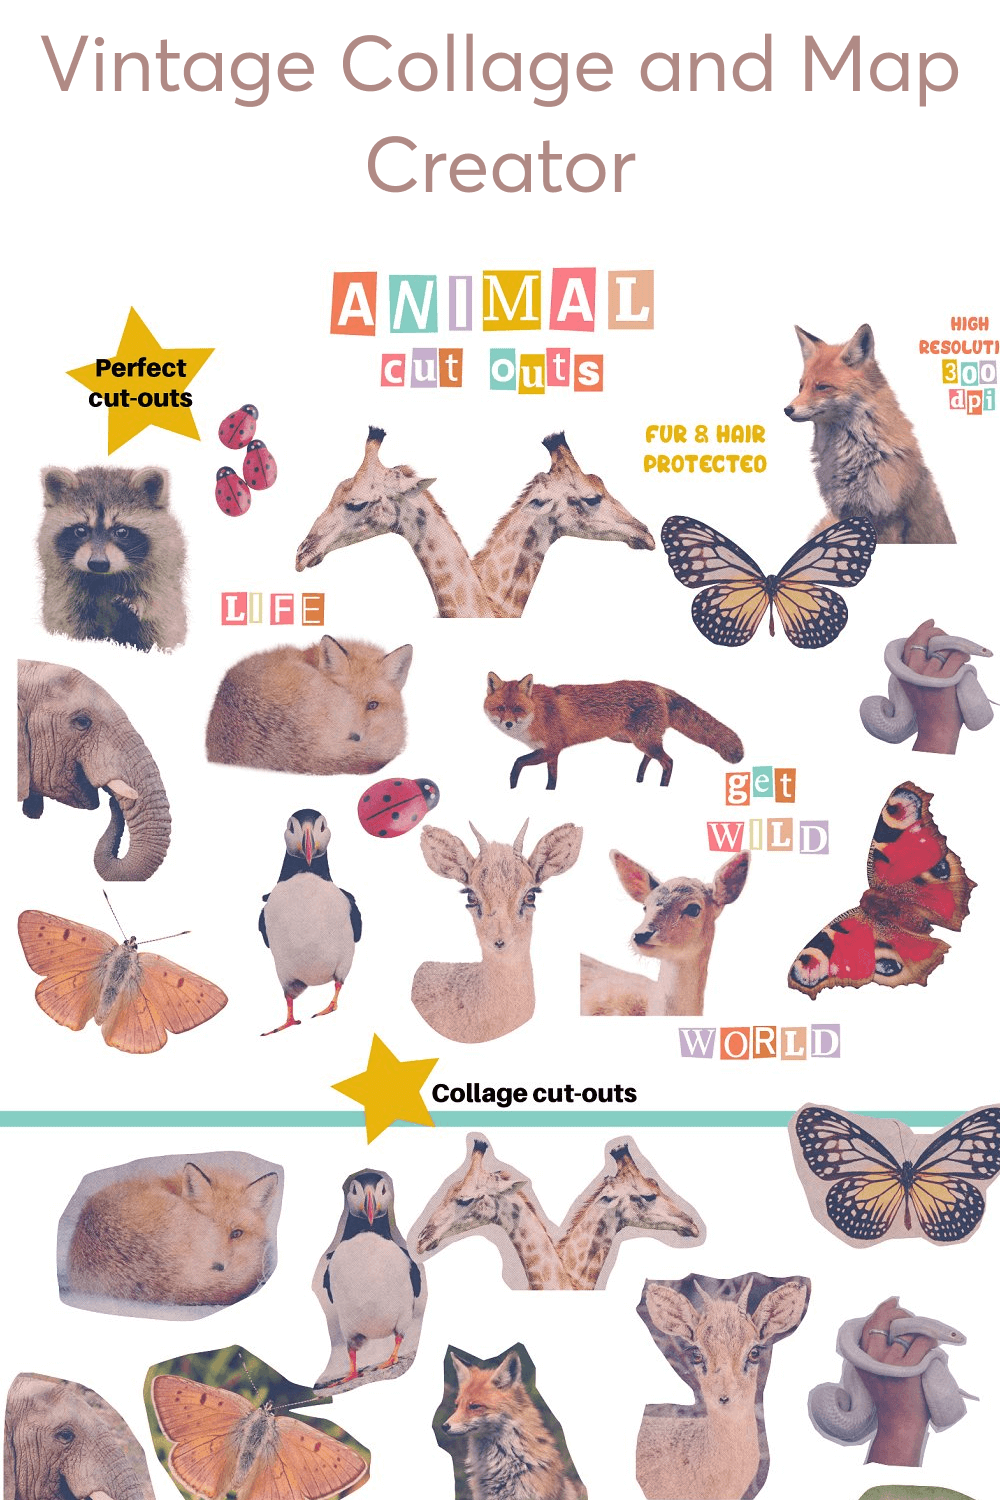 Animal Cut Outs.